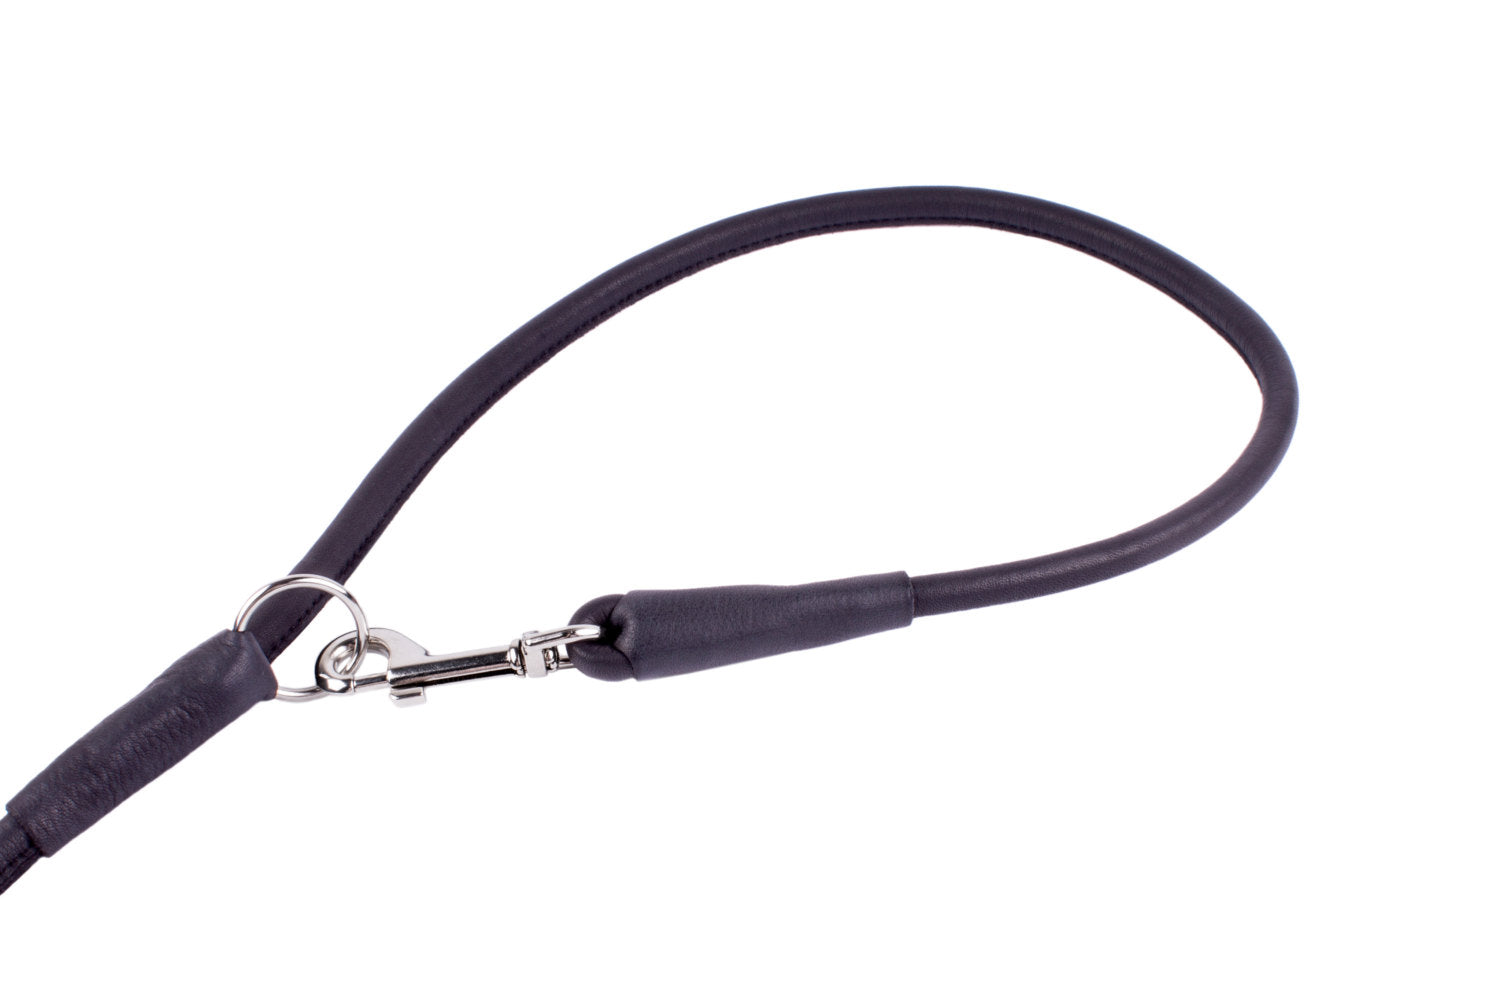 Multifunctional round-stitched leather dog leash - COLLAR SOFT - black or brown